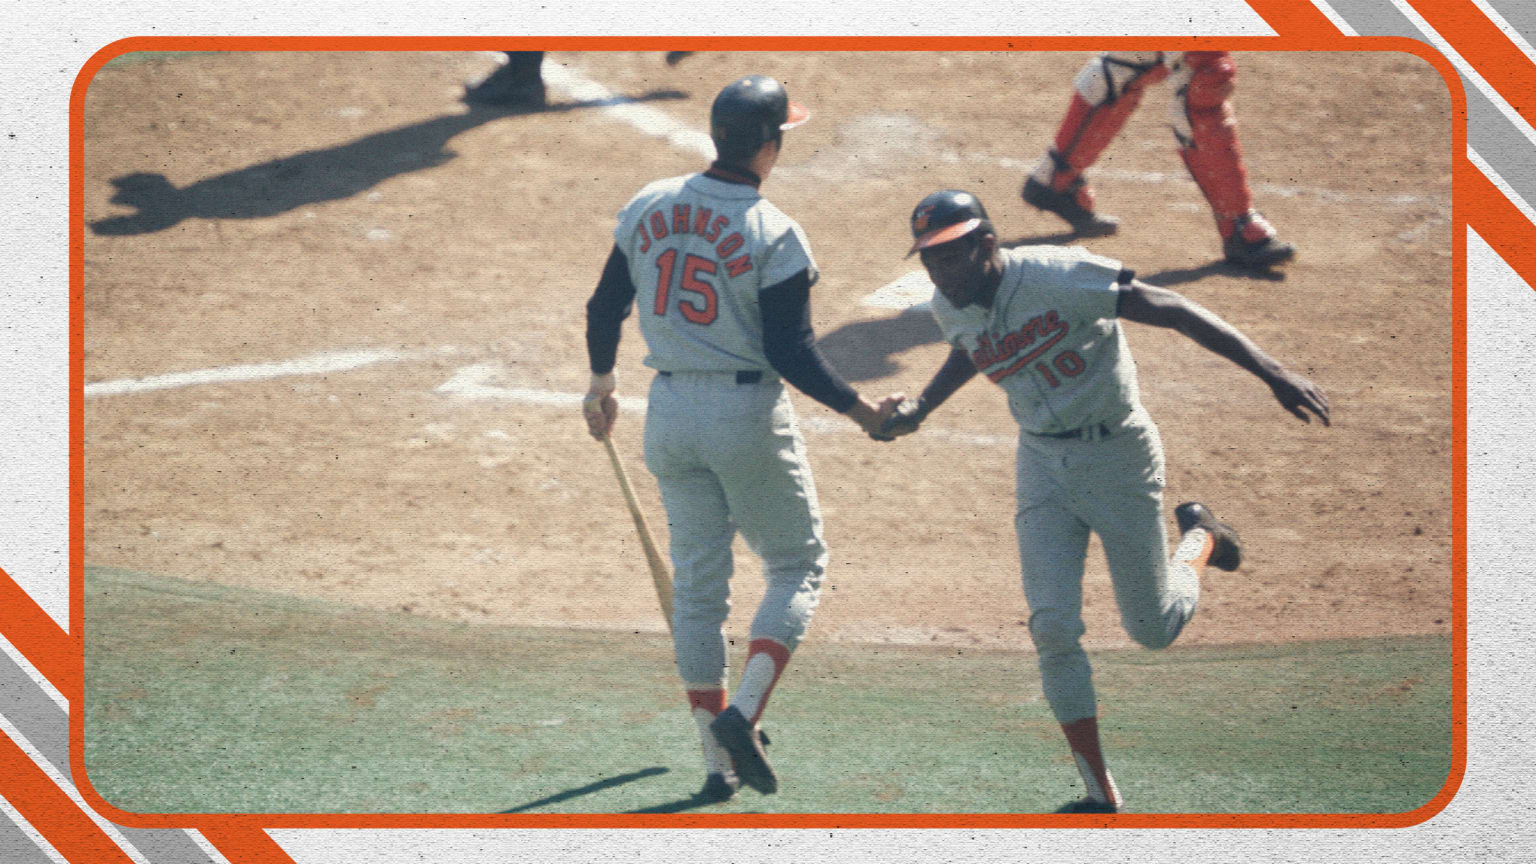 1970 World Series, Game 5: Reds @ Orioles 